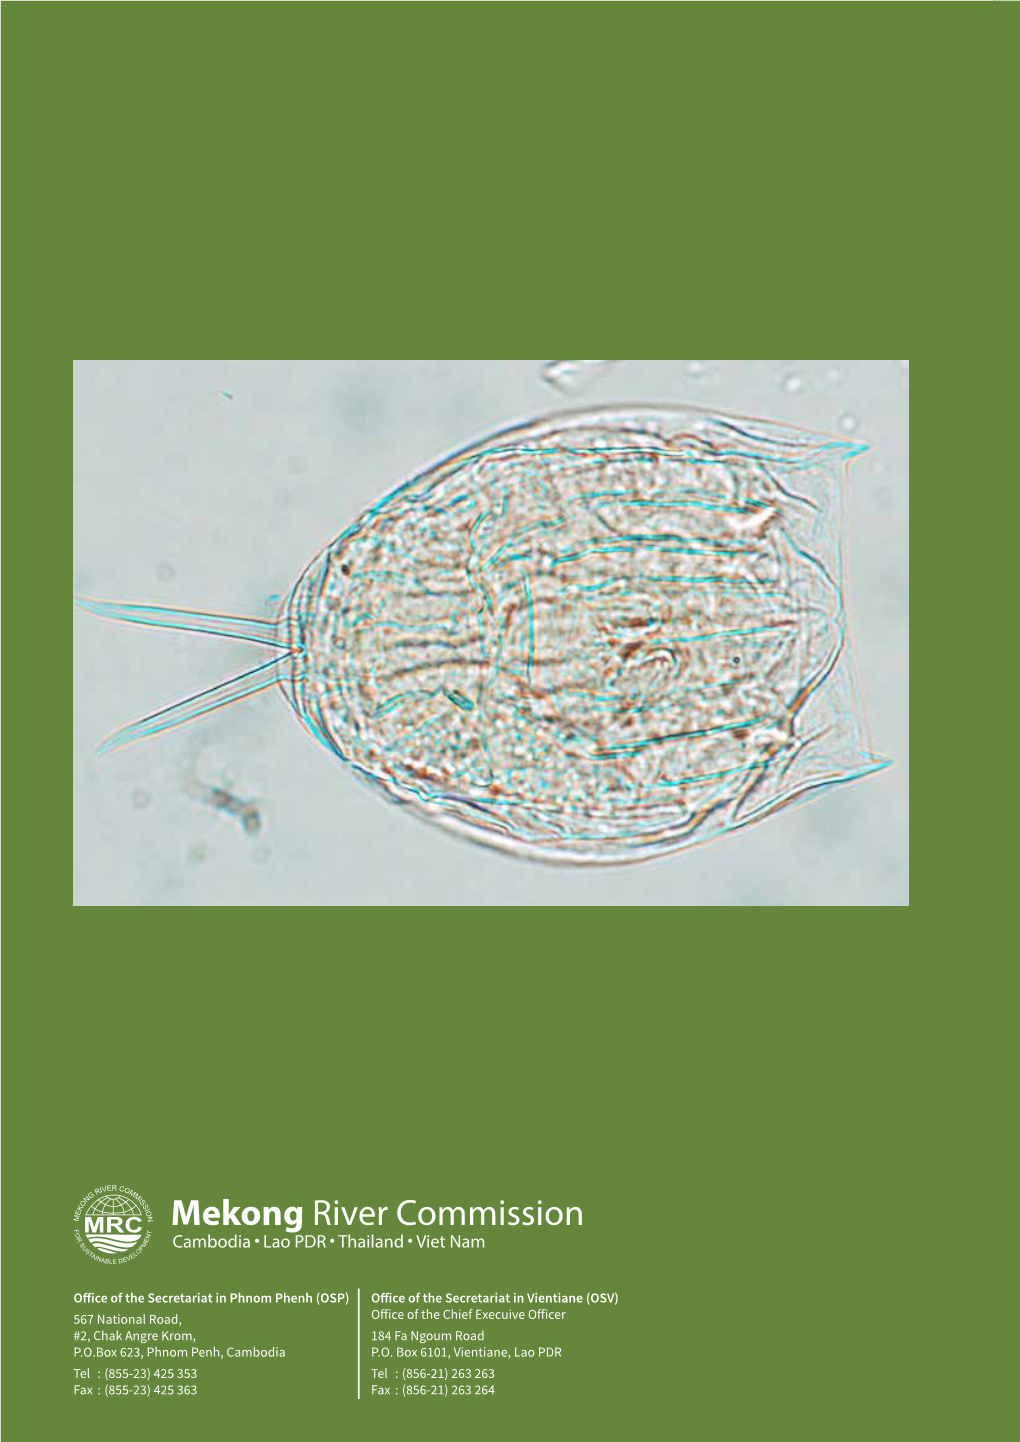 Report on the 2011 Biomonitoring Survey